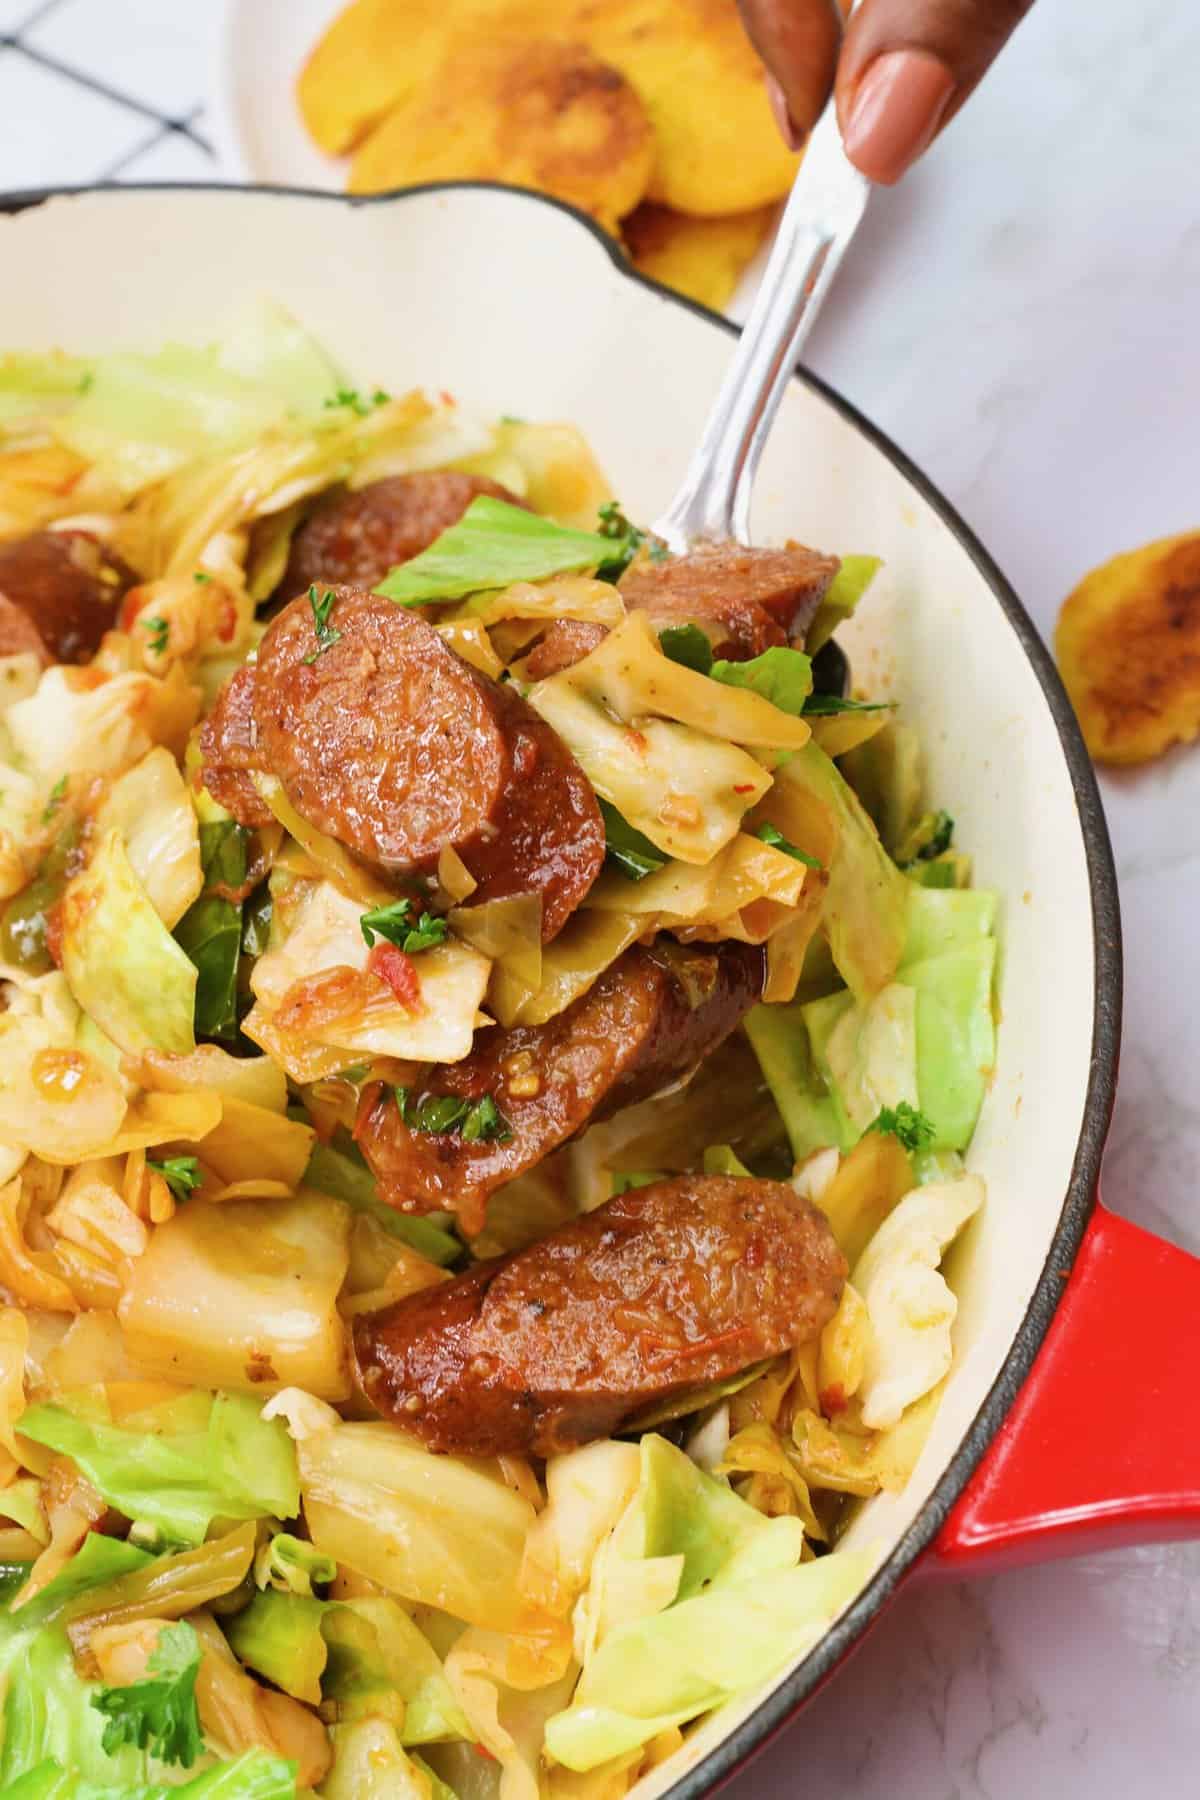 Cabbage and sausage to fill your heart